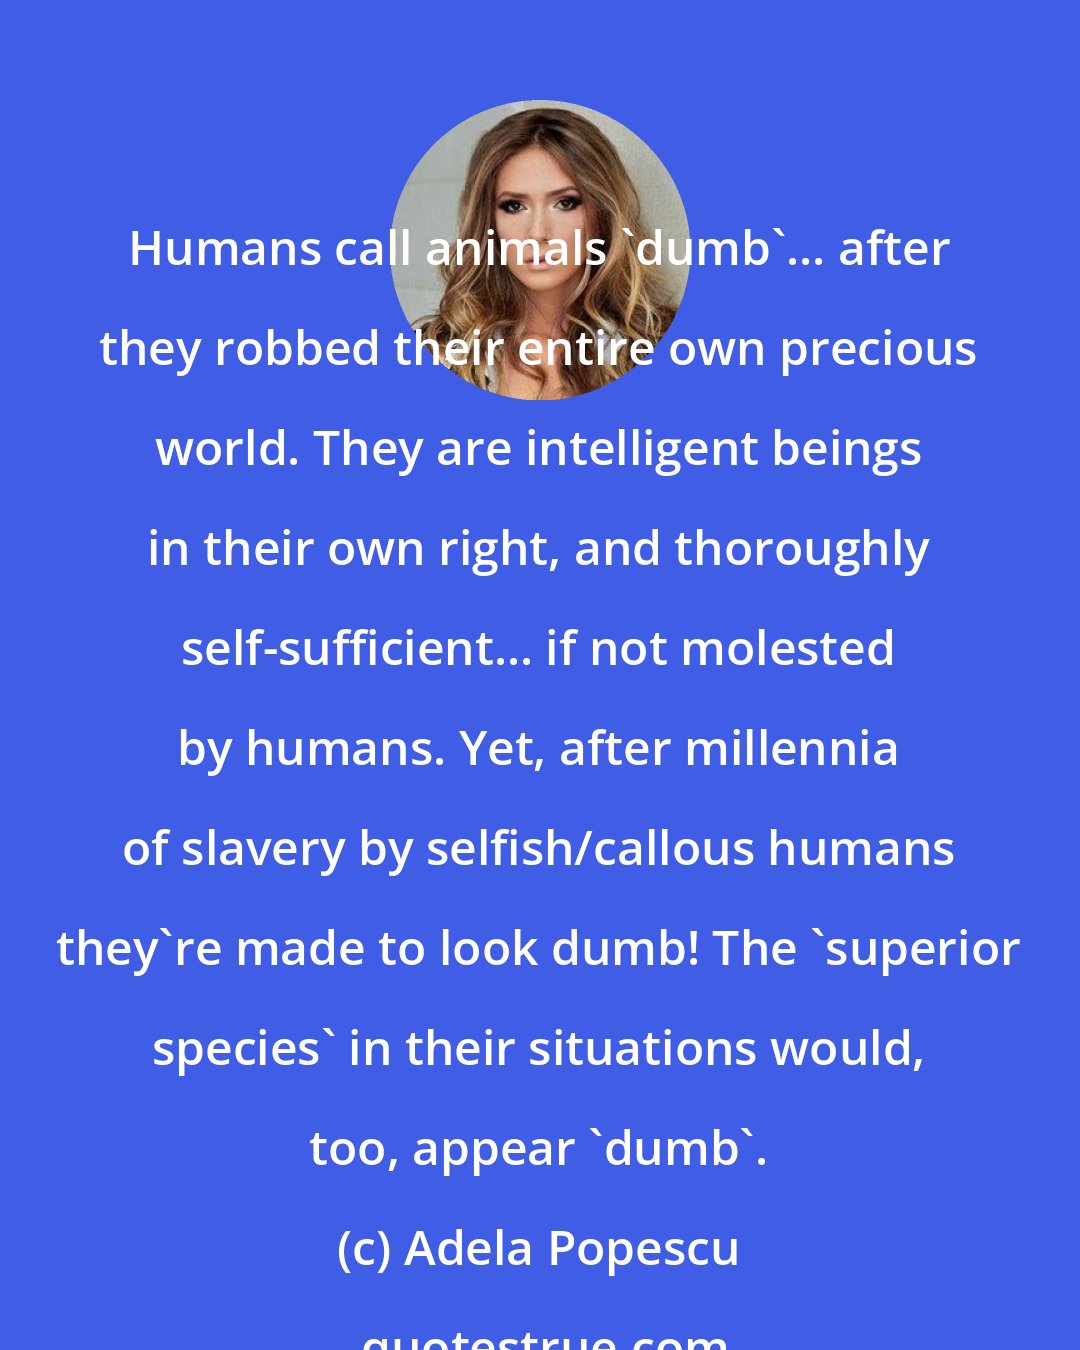 Adela Popescu: Humans call animals 'dumb'... after they robbed their entire own precious world. They are intelligent beings in their own right, and thoroughly self-sufficient... if not molested by humans. Yet, after millennia of slavery by selfish/callous humans they're made to look dumb! The 'superior species' in their situations would, too, appear 'dumb'.